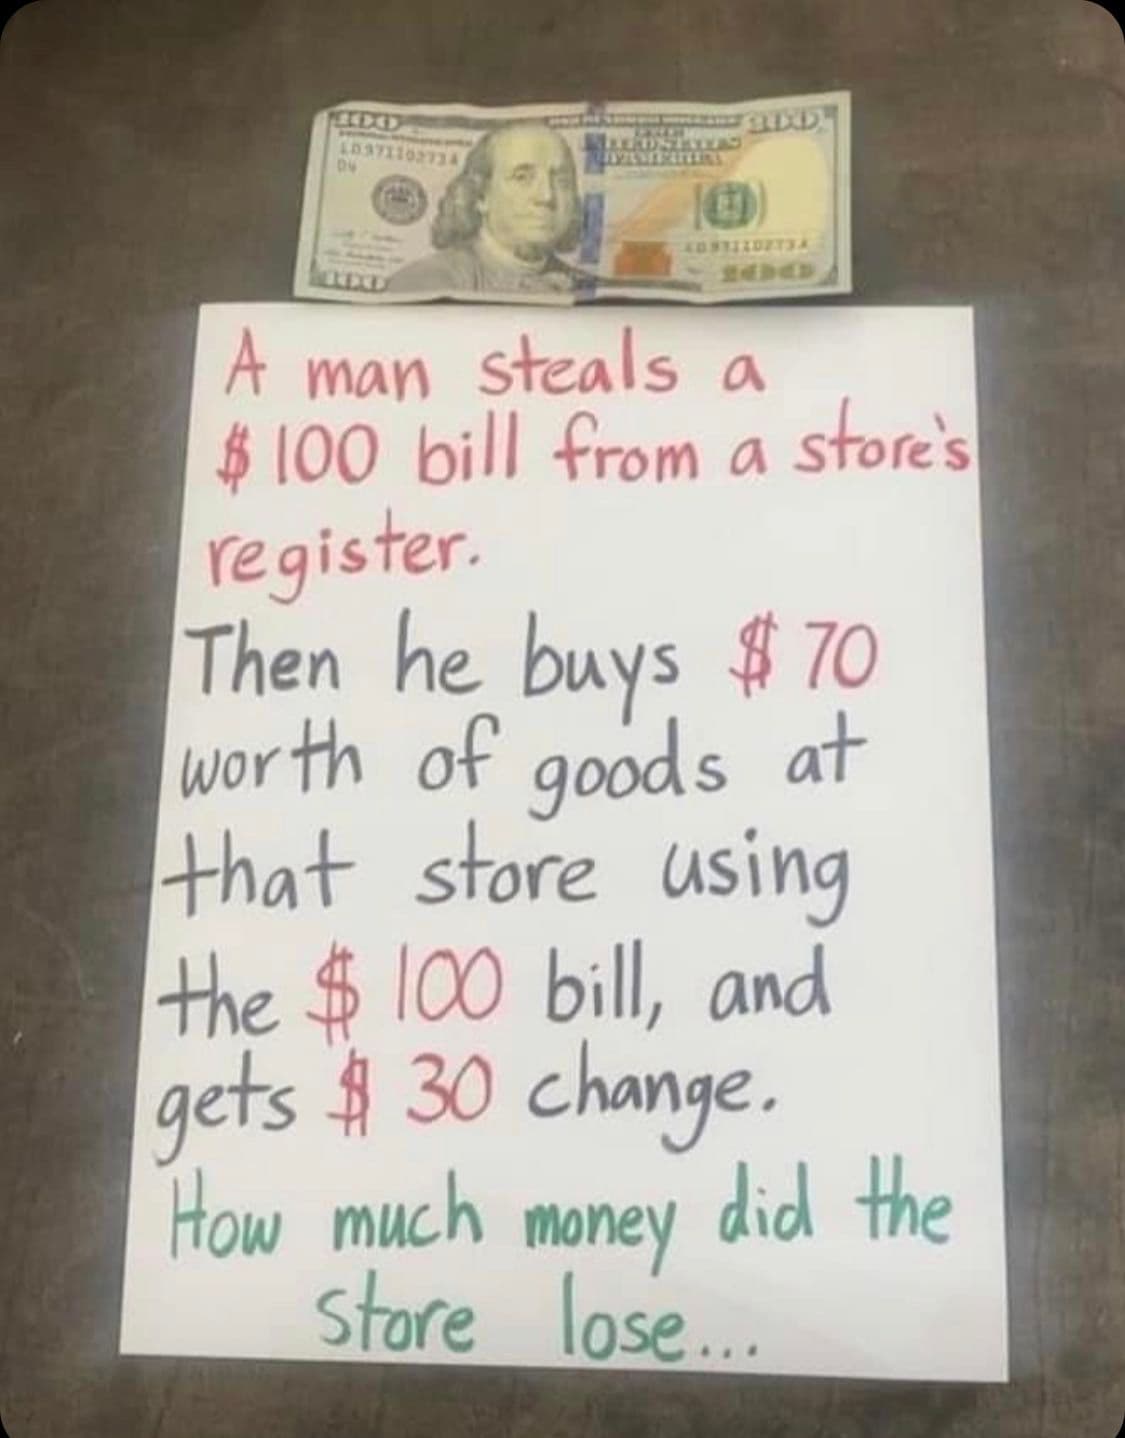 10371102734
D
PAR
KEROSTACEAS
IVAM PATTERS
AUSTIZONTSA
A man steals a
$100 bill from a store's
register.
Then he buys $70
worth of goods at
that store using
the $100 bill, and
gets $30 change.
How much money did the
store lose...